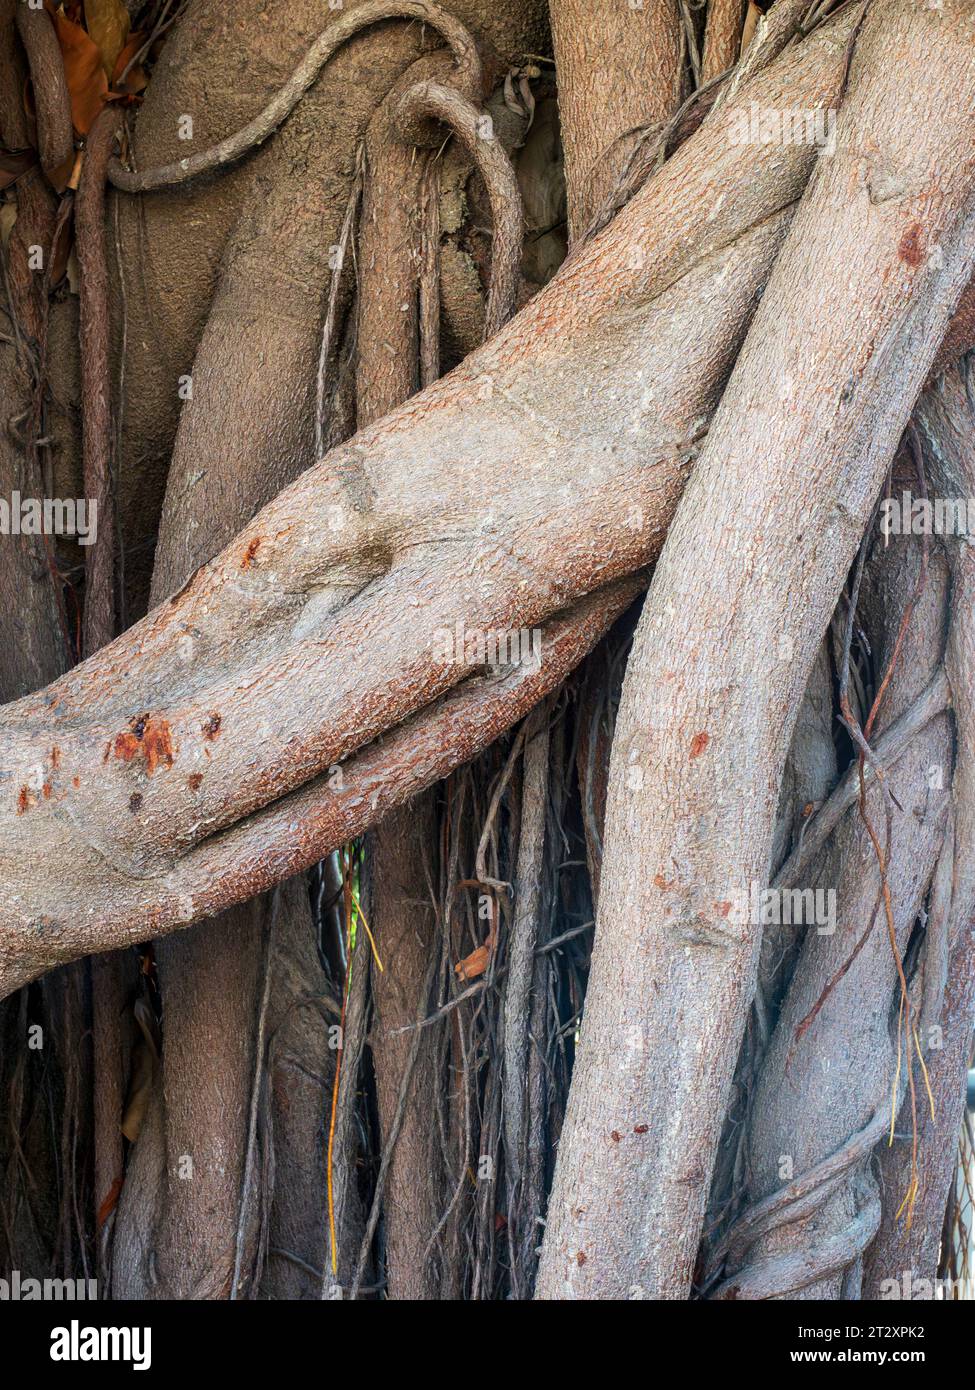 Close-up of the trunk of a hundred-year-old ficus tree Stock Photo